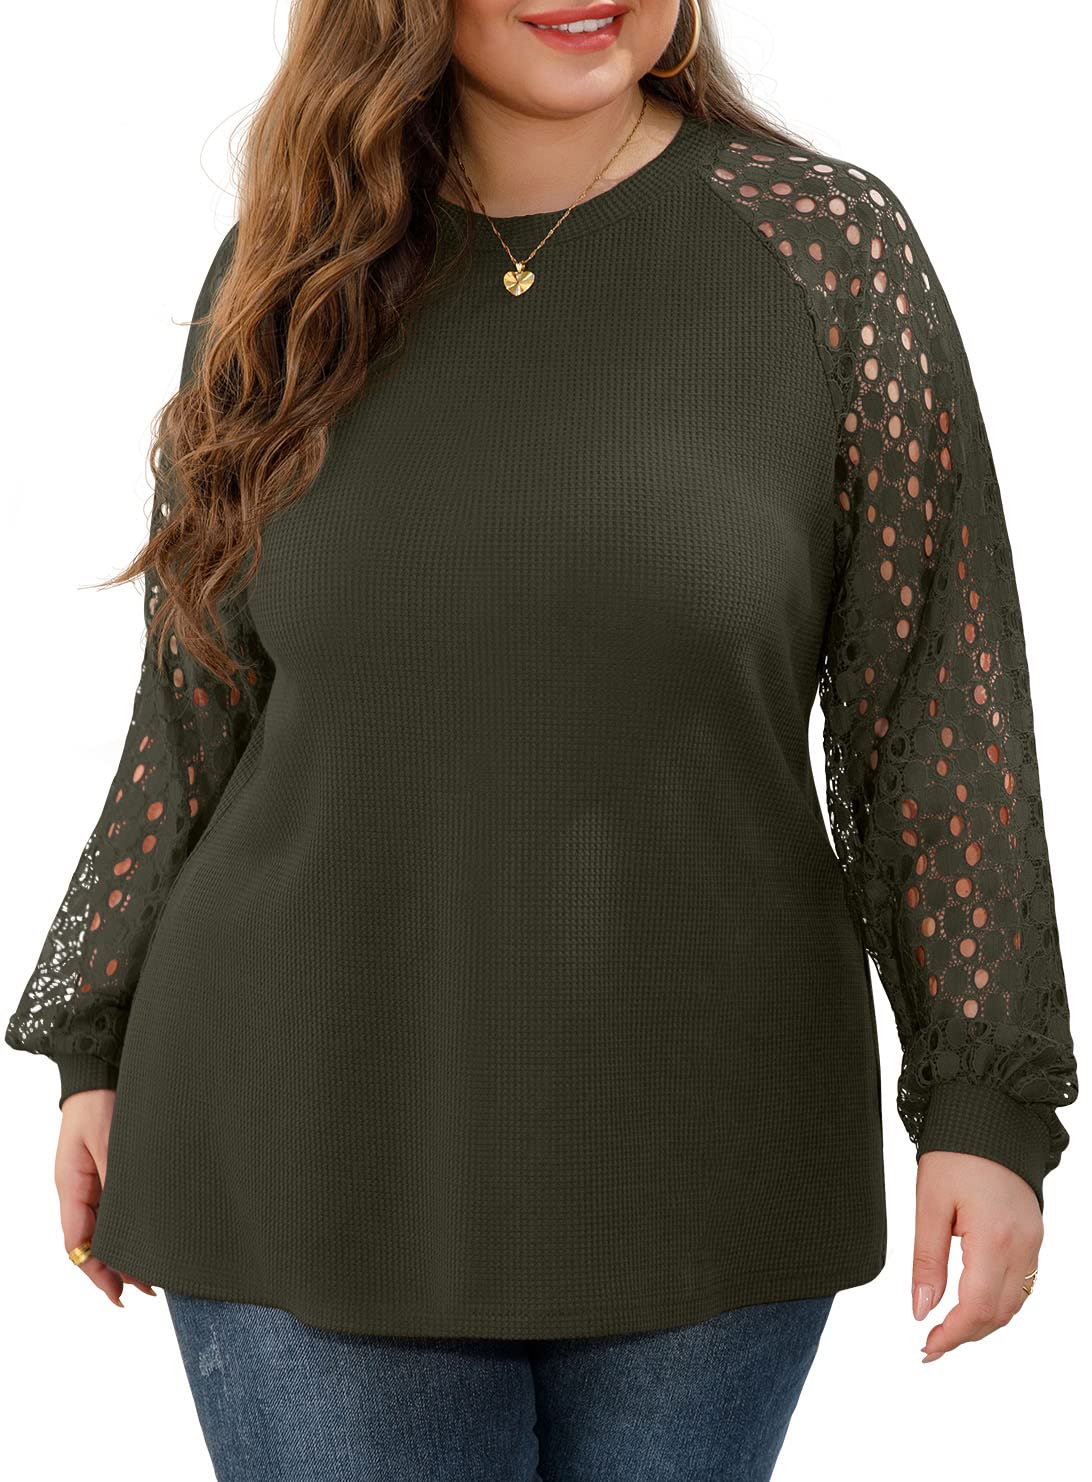 JWD Plus Size Tops For Women Lace Sleeve Blouse Waffle Knit Long Sleeve  Shirts Wine Red-2X